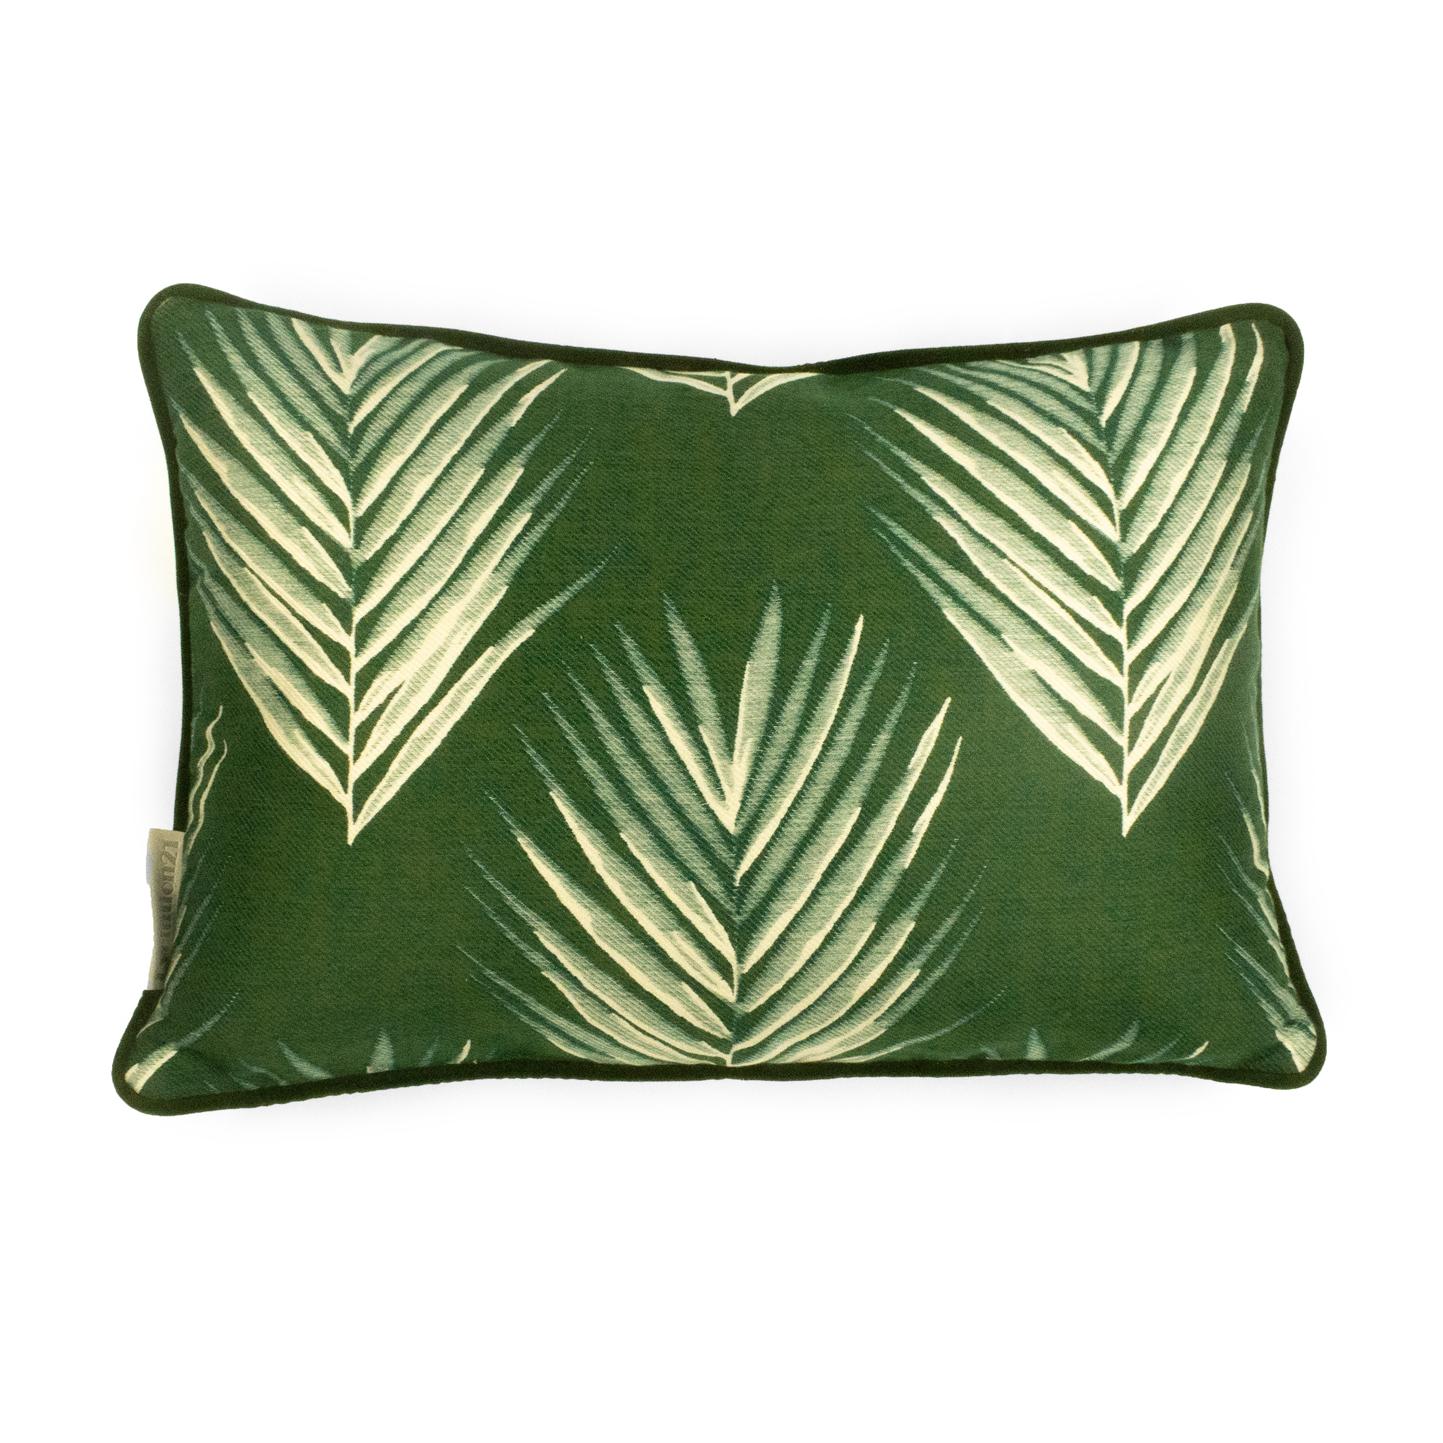 Modern Cushion / Pillow Patterned Bamboo Reverse Leaf Green by Evolution21 For Sale